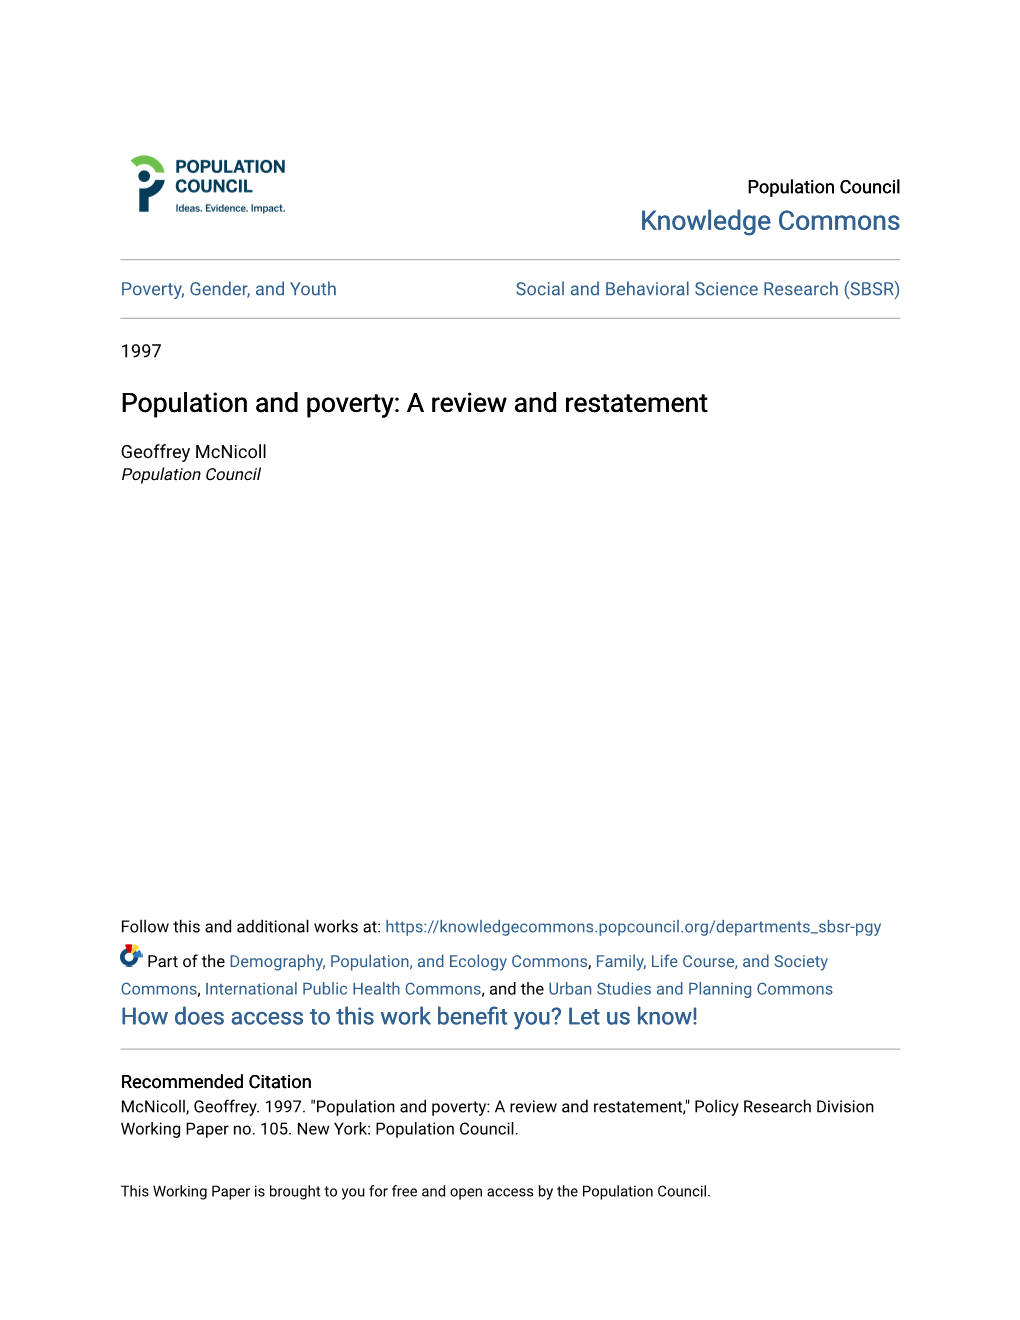 Population and Poverty: a Review and Restatement